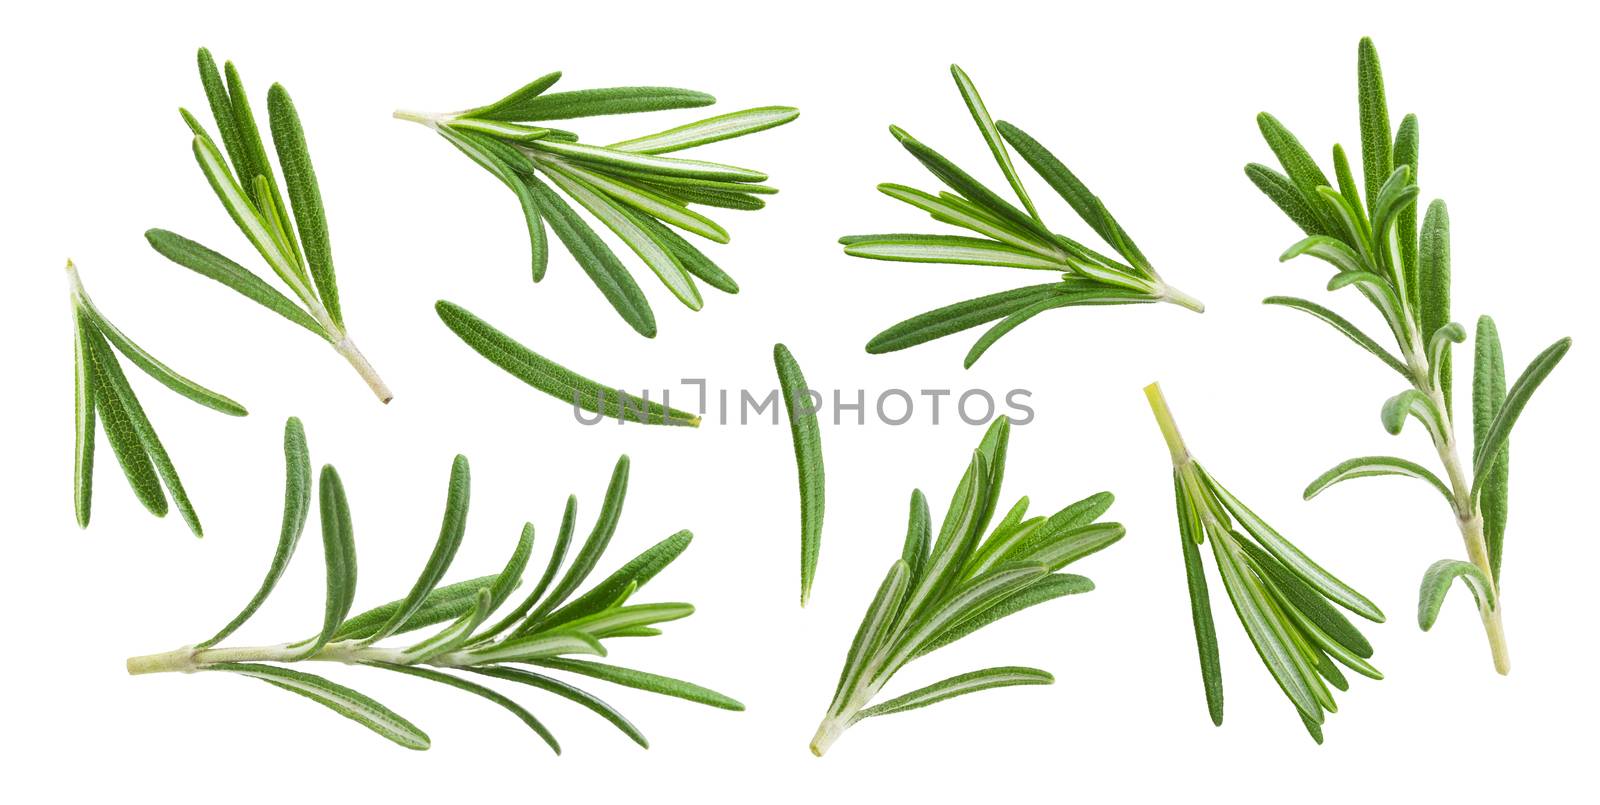 Rosemary twig and leaves isolated on white background with clipping path, collection by xamtiw